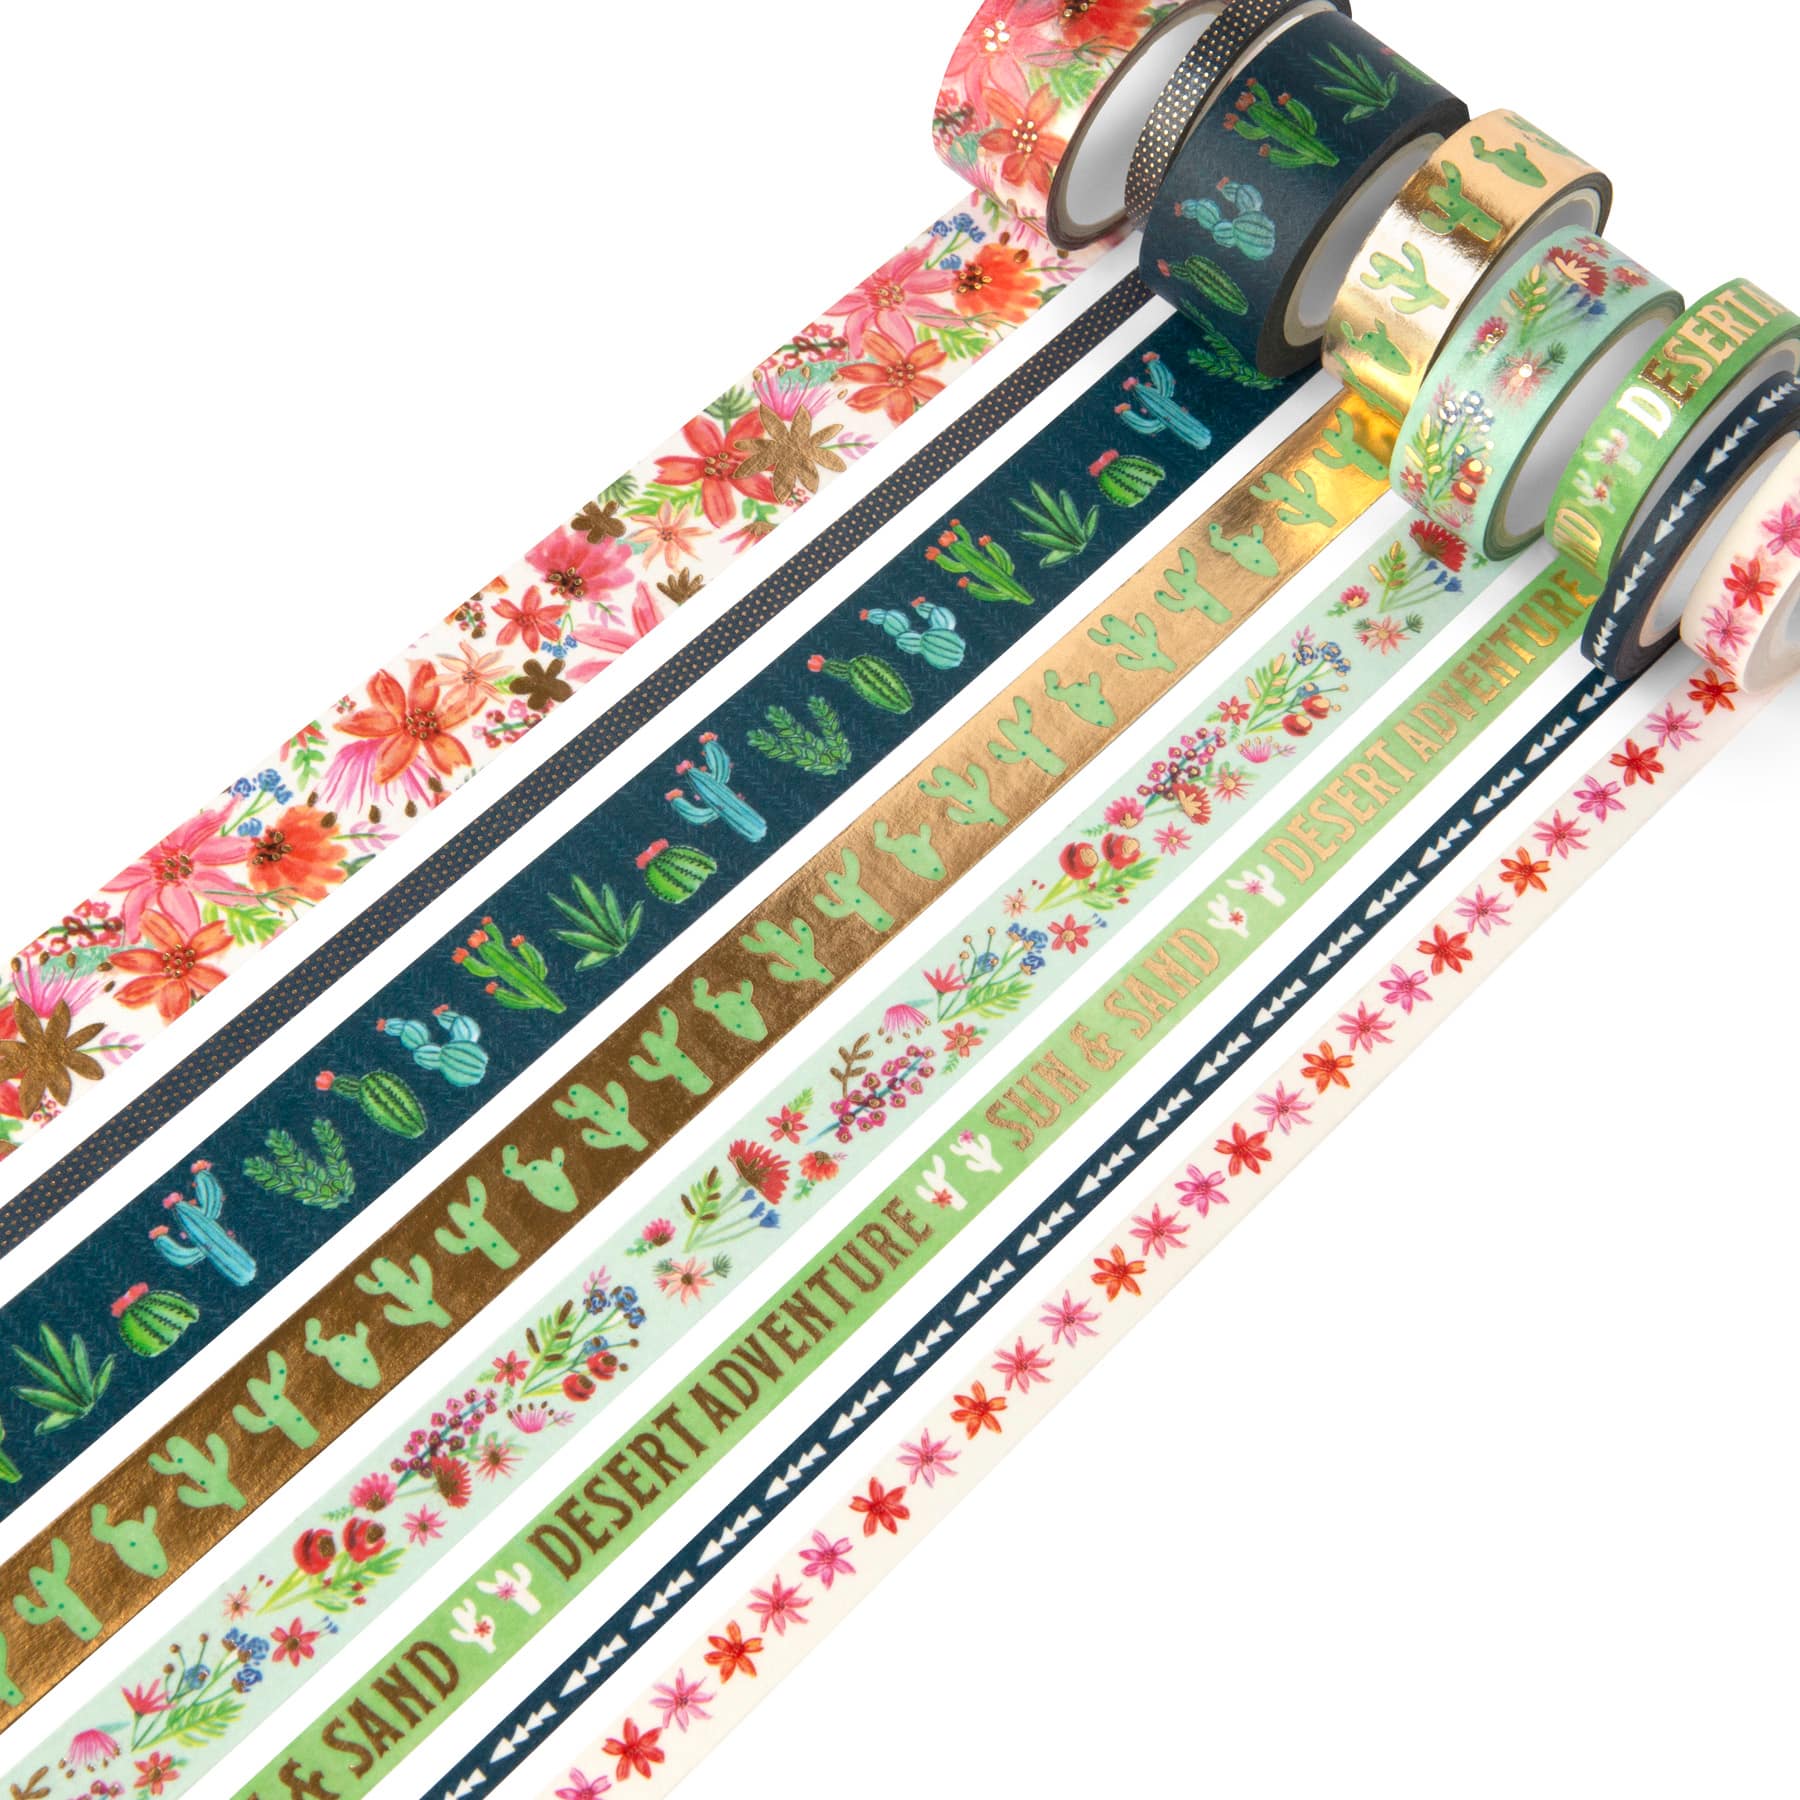 Grid Line Crafting Washi Tape Set by Recollections | Michaels